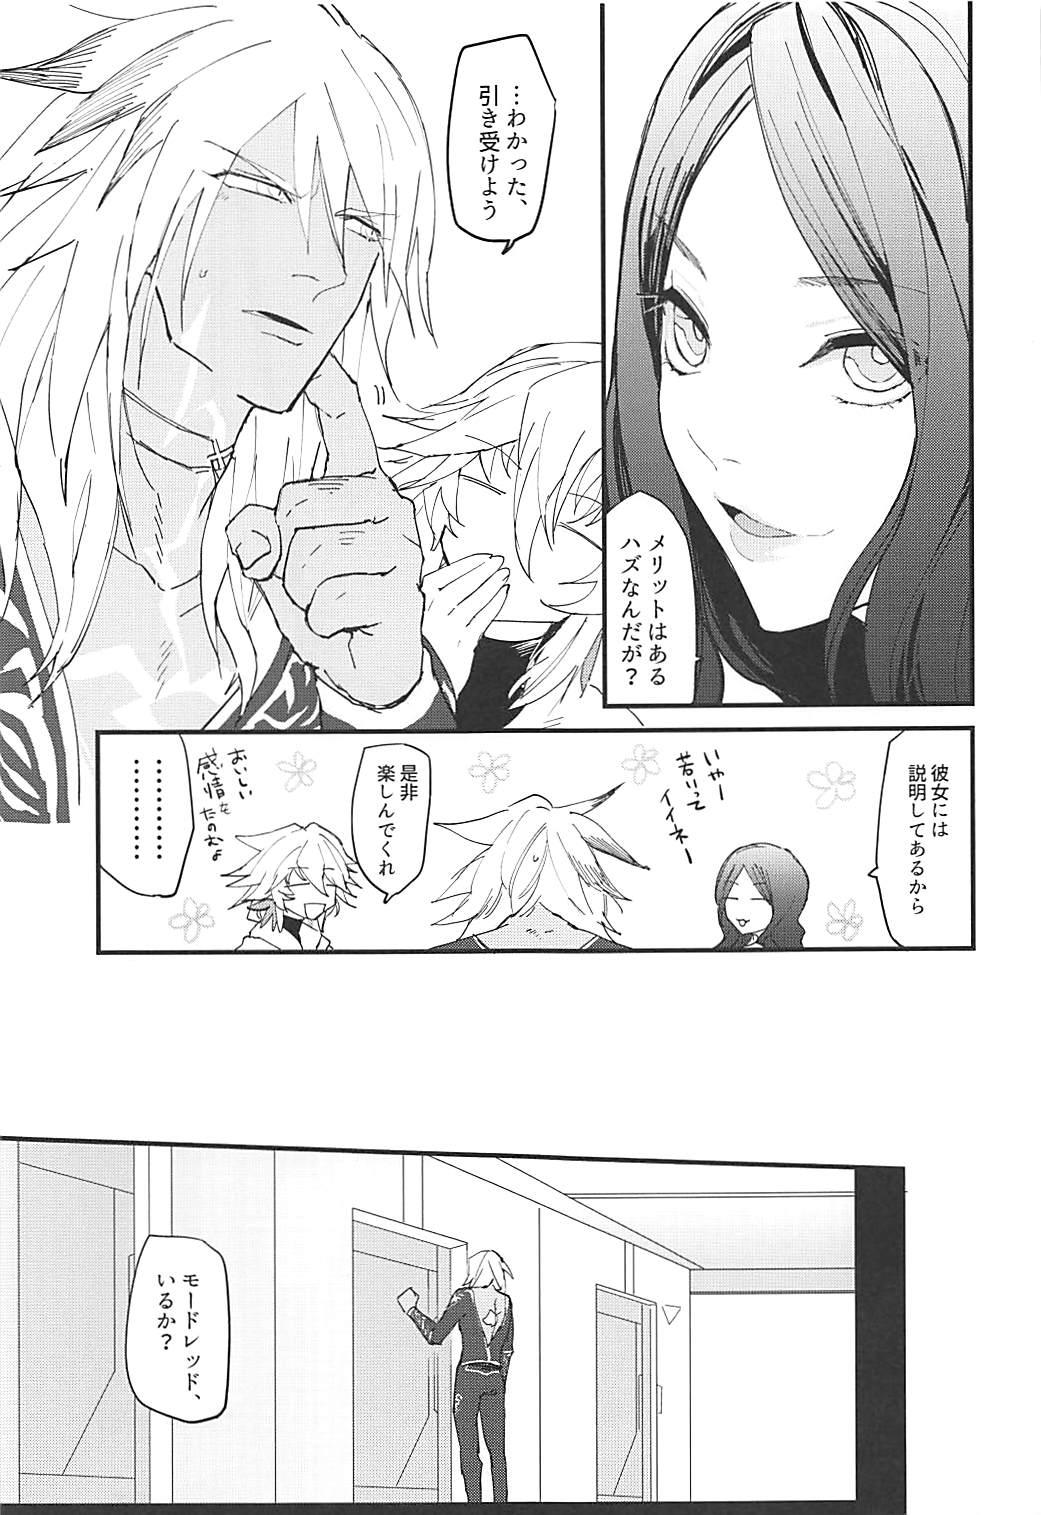 Travesti THE WARRIORS' REST - Fate grand order Celebrities - Page 5